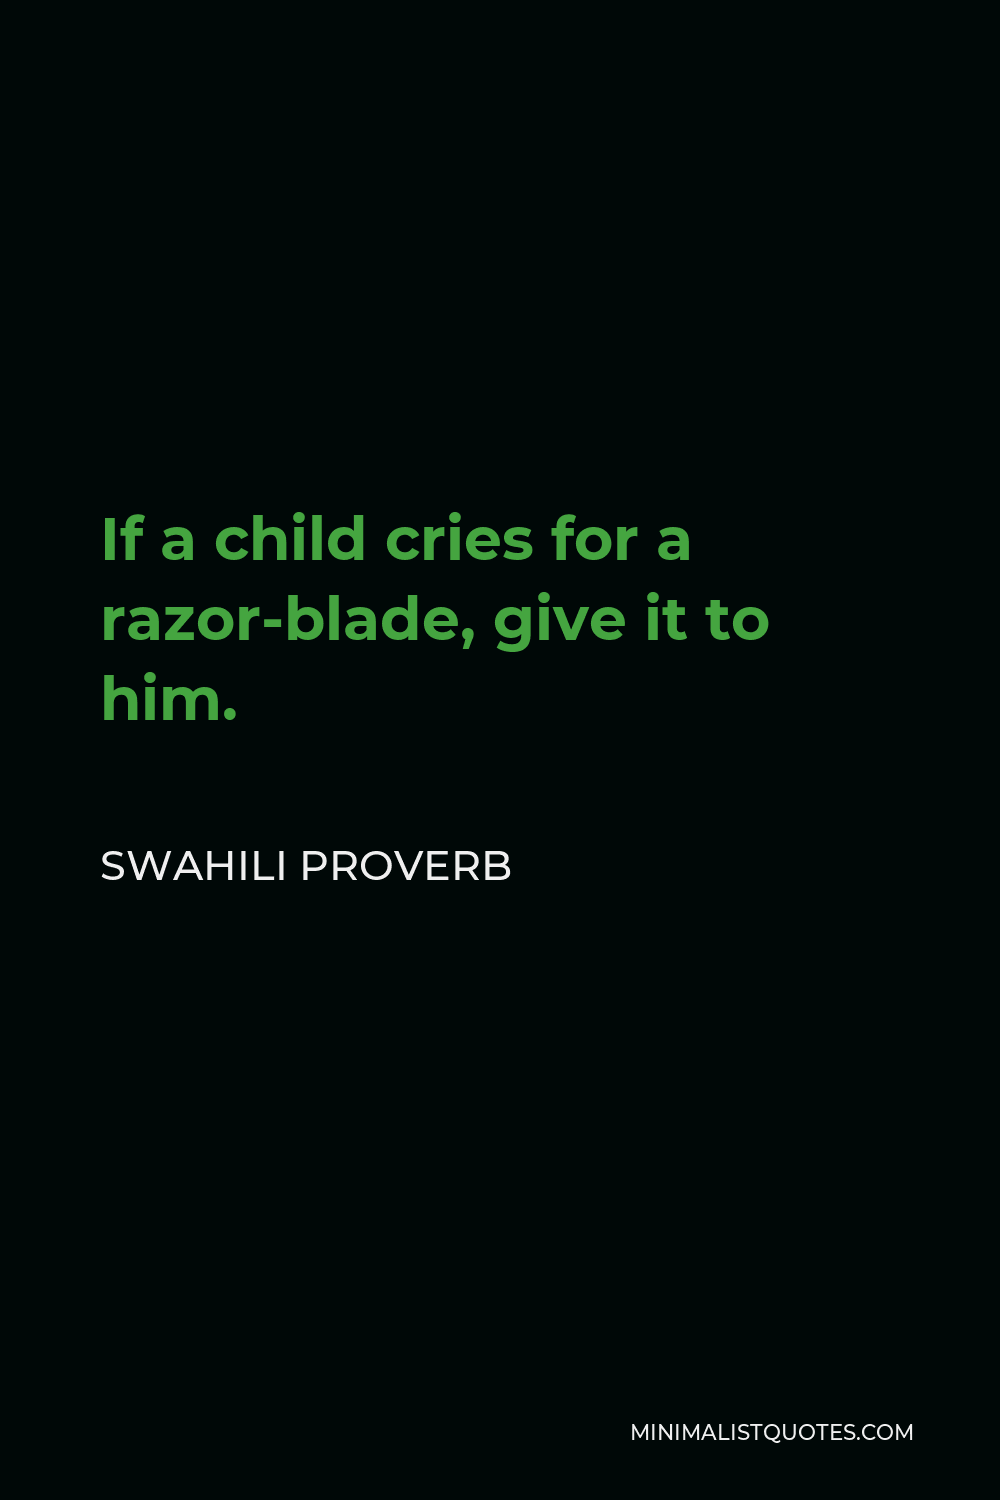 Swahili Proverb Quote - If a child cries for a razor-blade, give it to him.